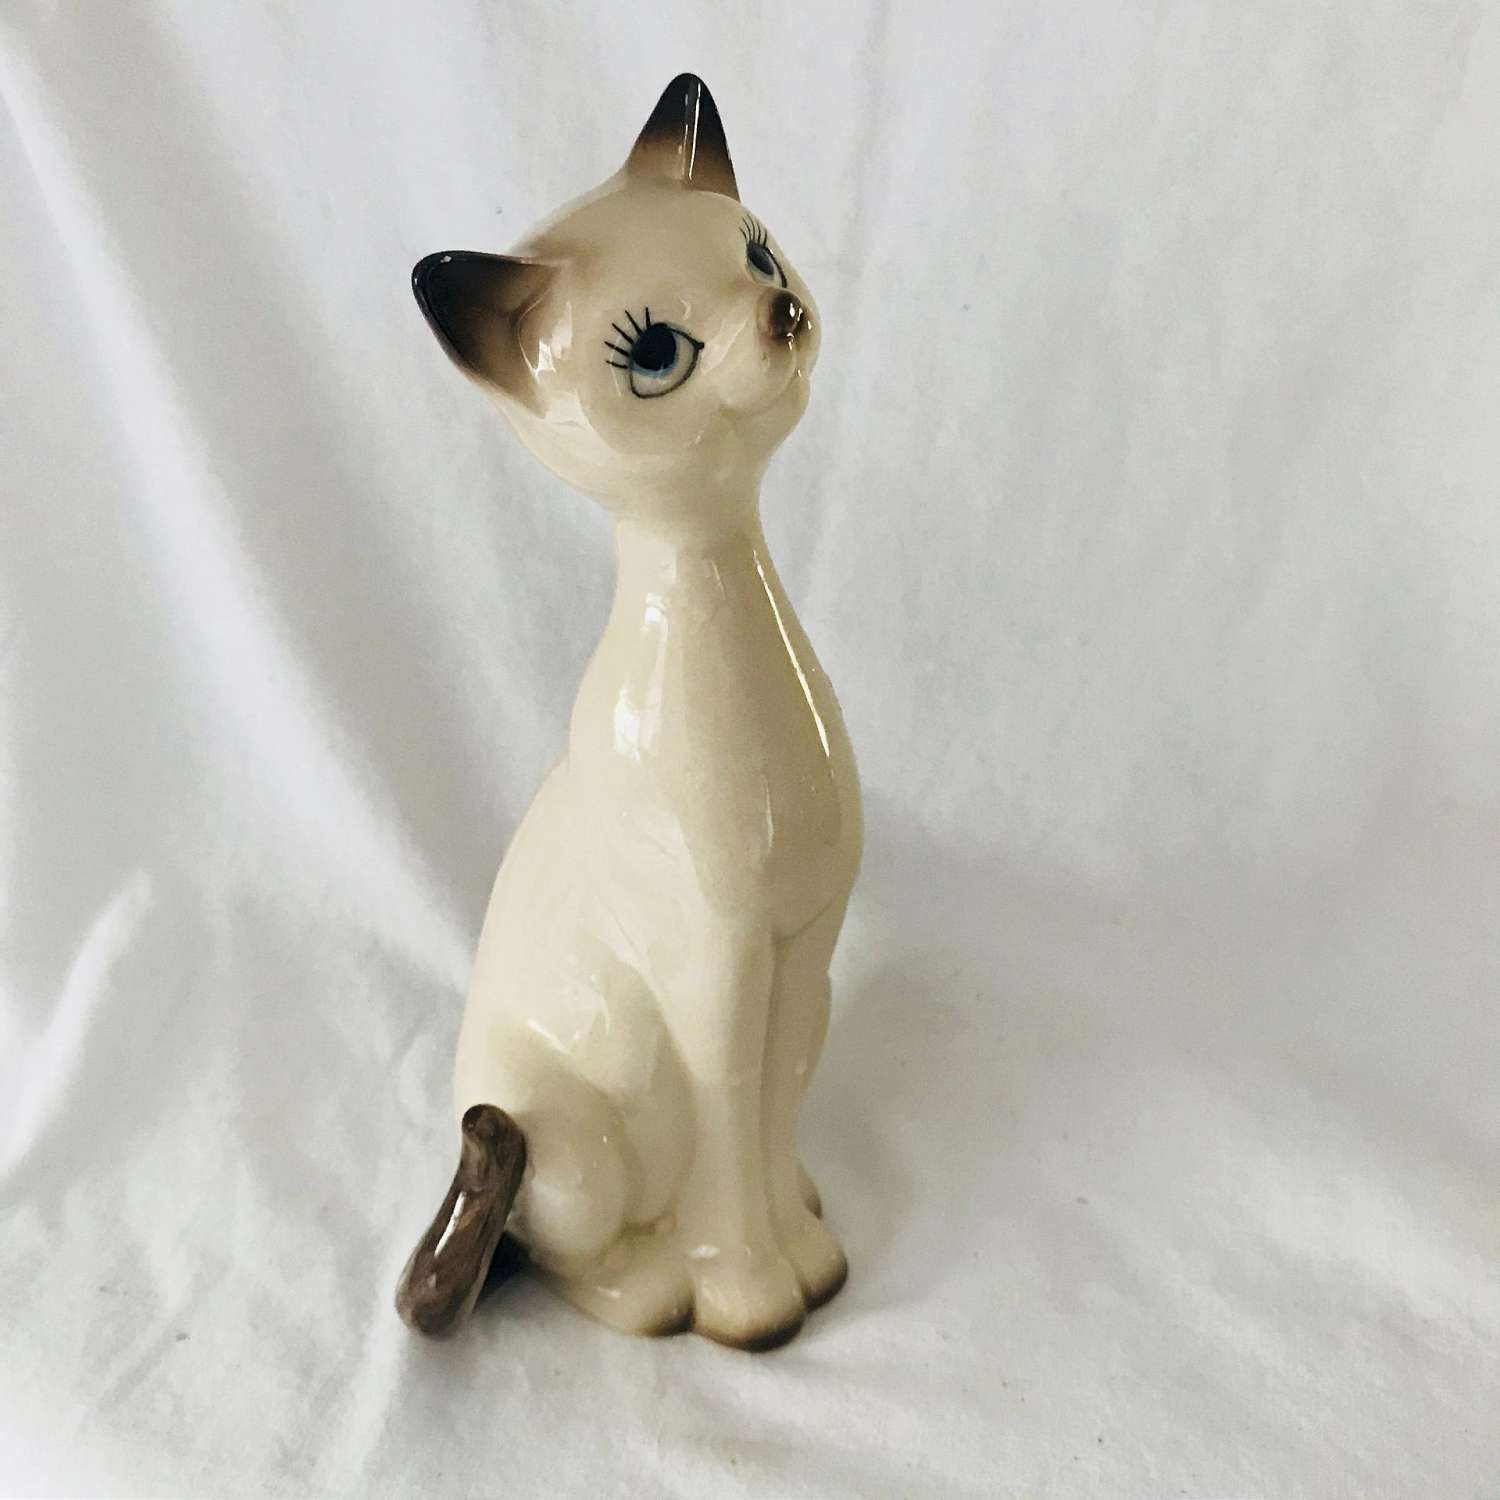 https://www.truevintageantiques.com/wp-content/uploads/2019/12/vintage-siamese-cat-kitten-figurines-fine-bone-china-quality-large-cottage-display-farmhouse-shabby-chic-collectible-home-decor-5dfabbce5-scaled.jpg